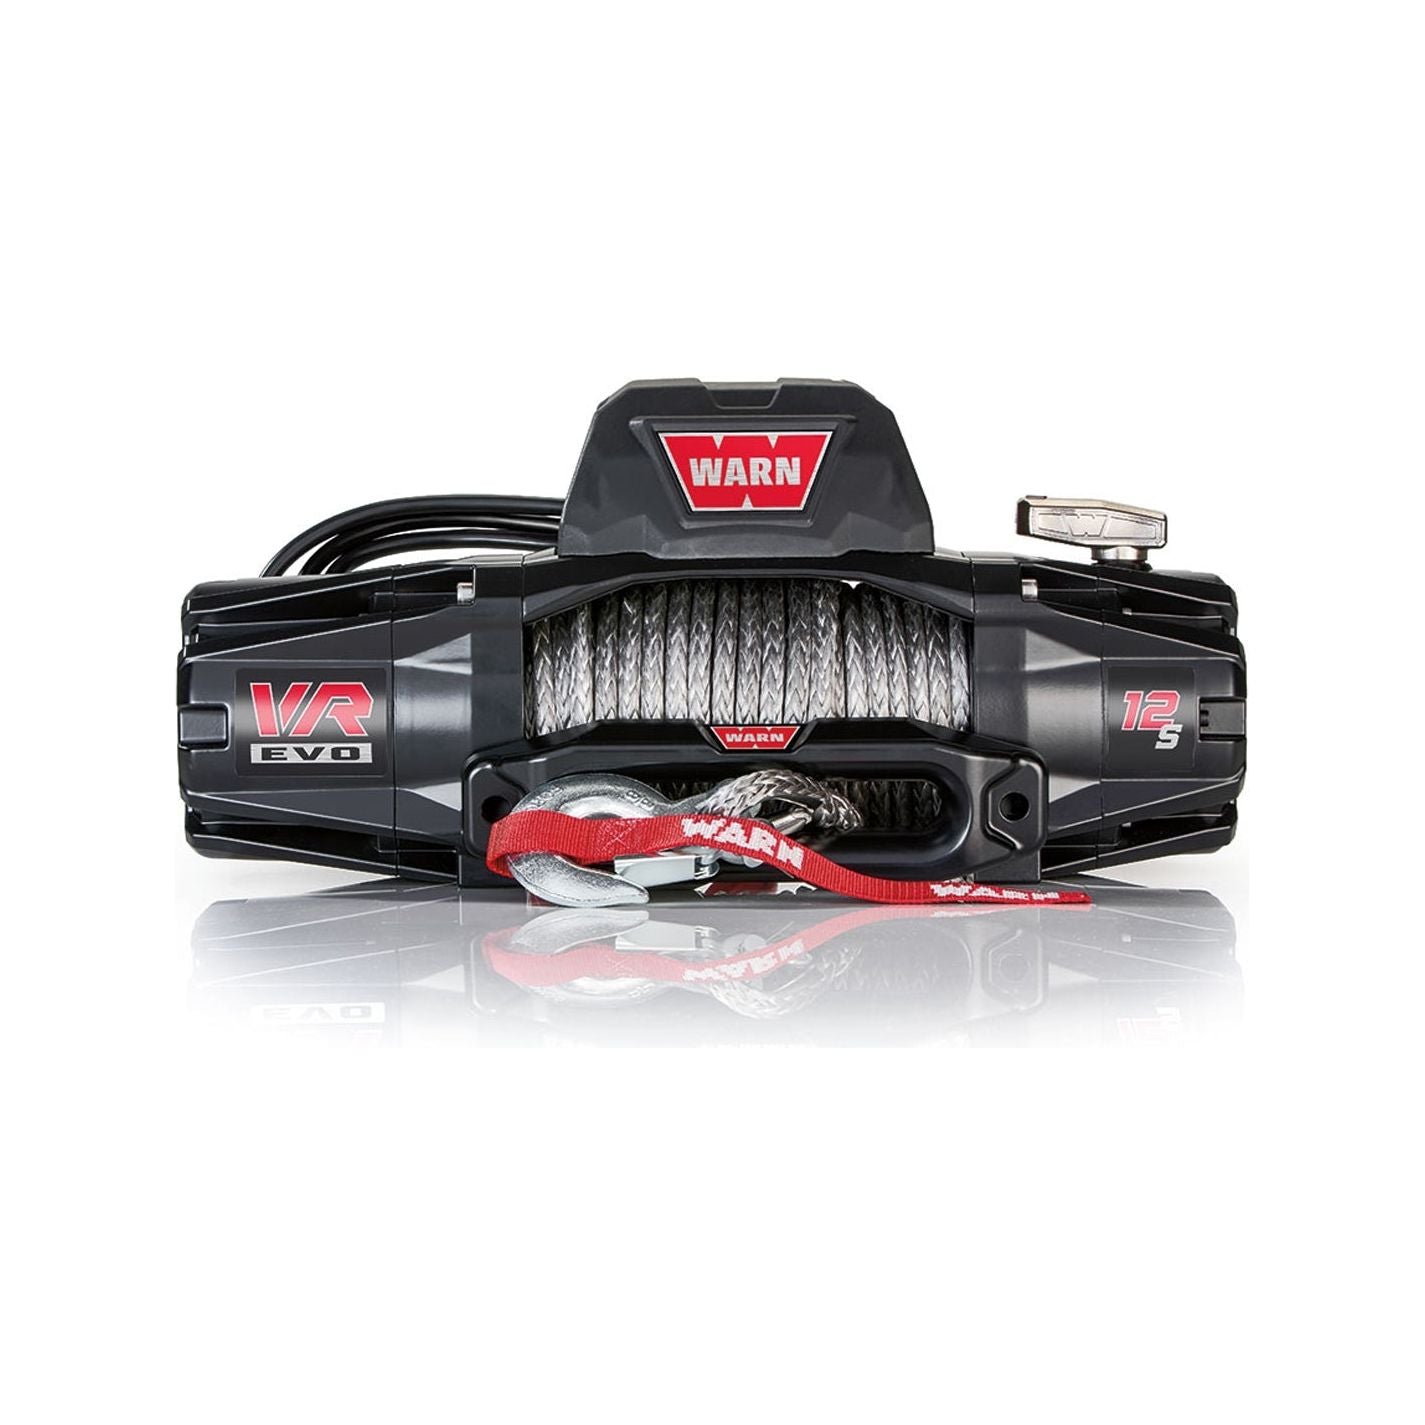 WARN 103255 - VR EVO 12-S Winch 12000# Synthetic Rope